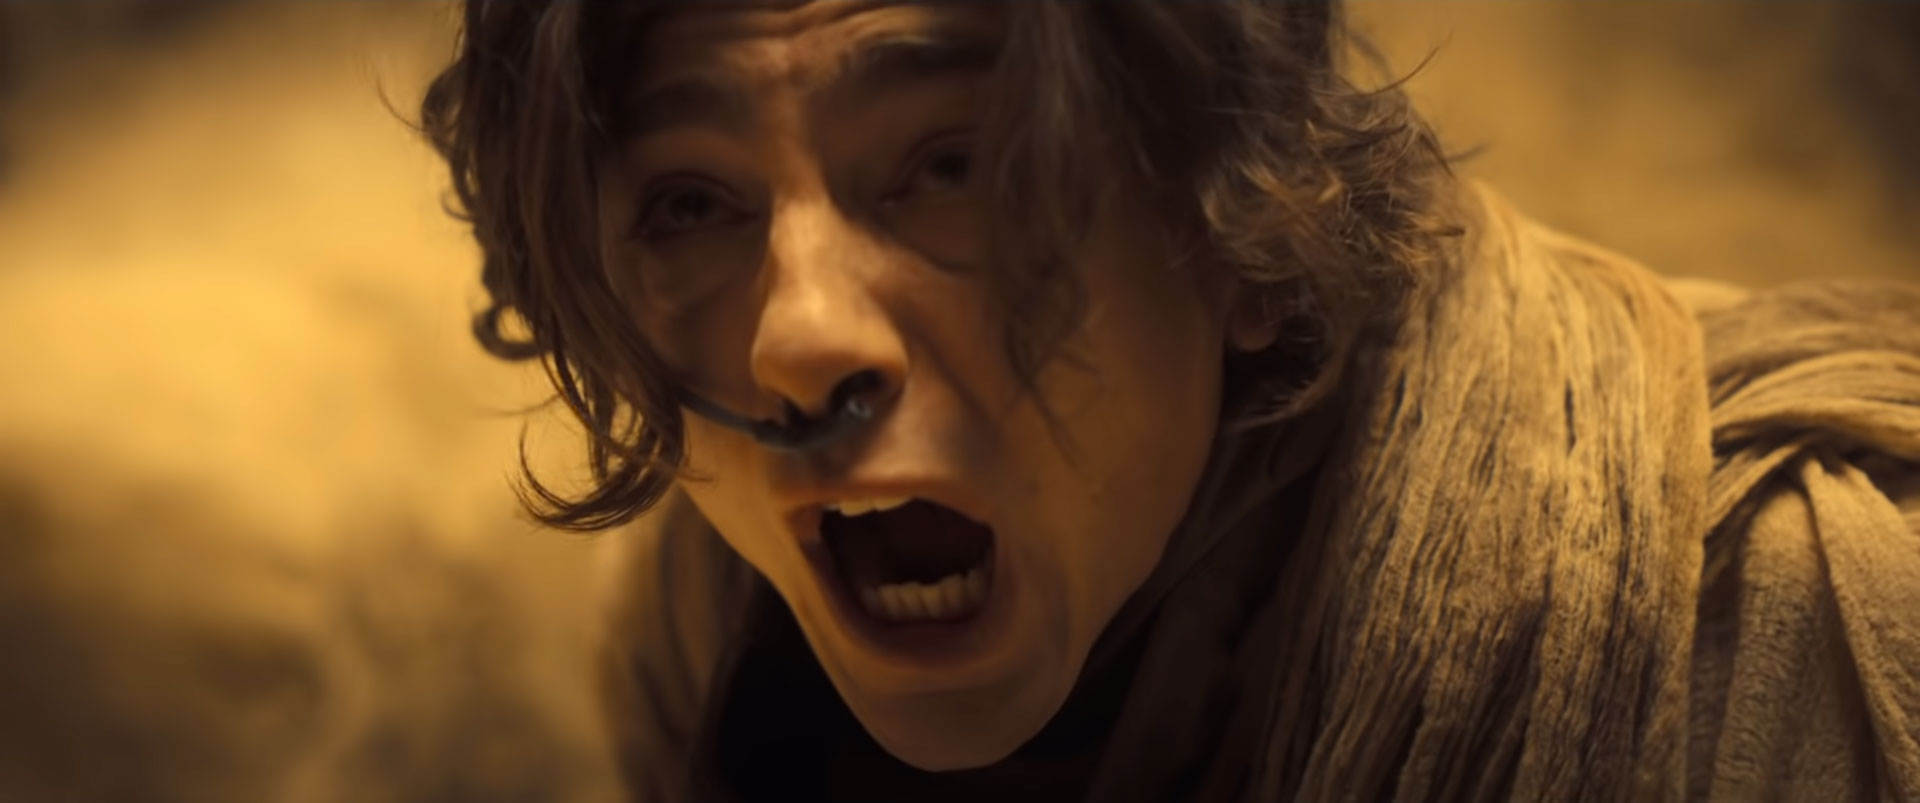 Paul Atreides (played by Timothée Chalamet) screaming, in a scene from the Dune movie's first trailer 